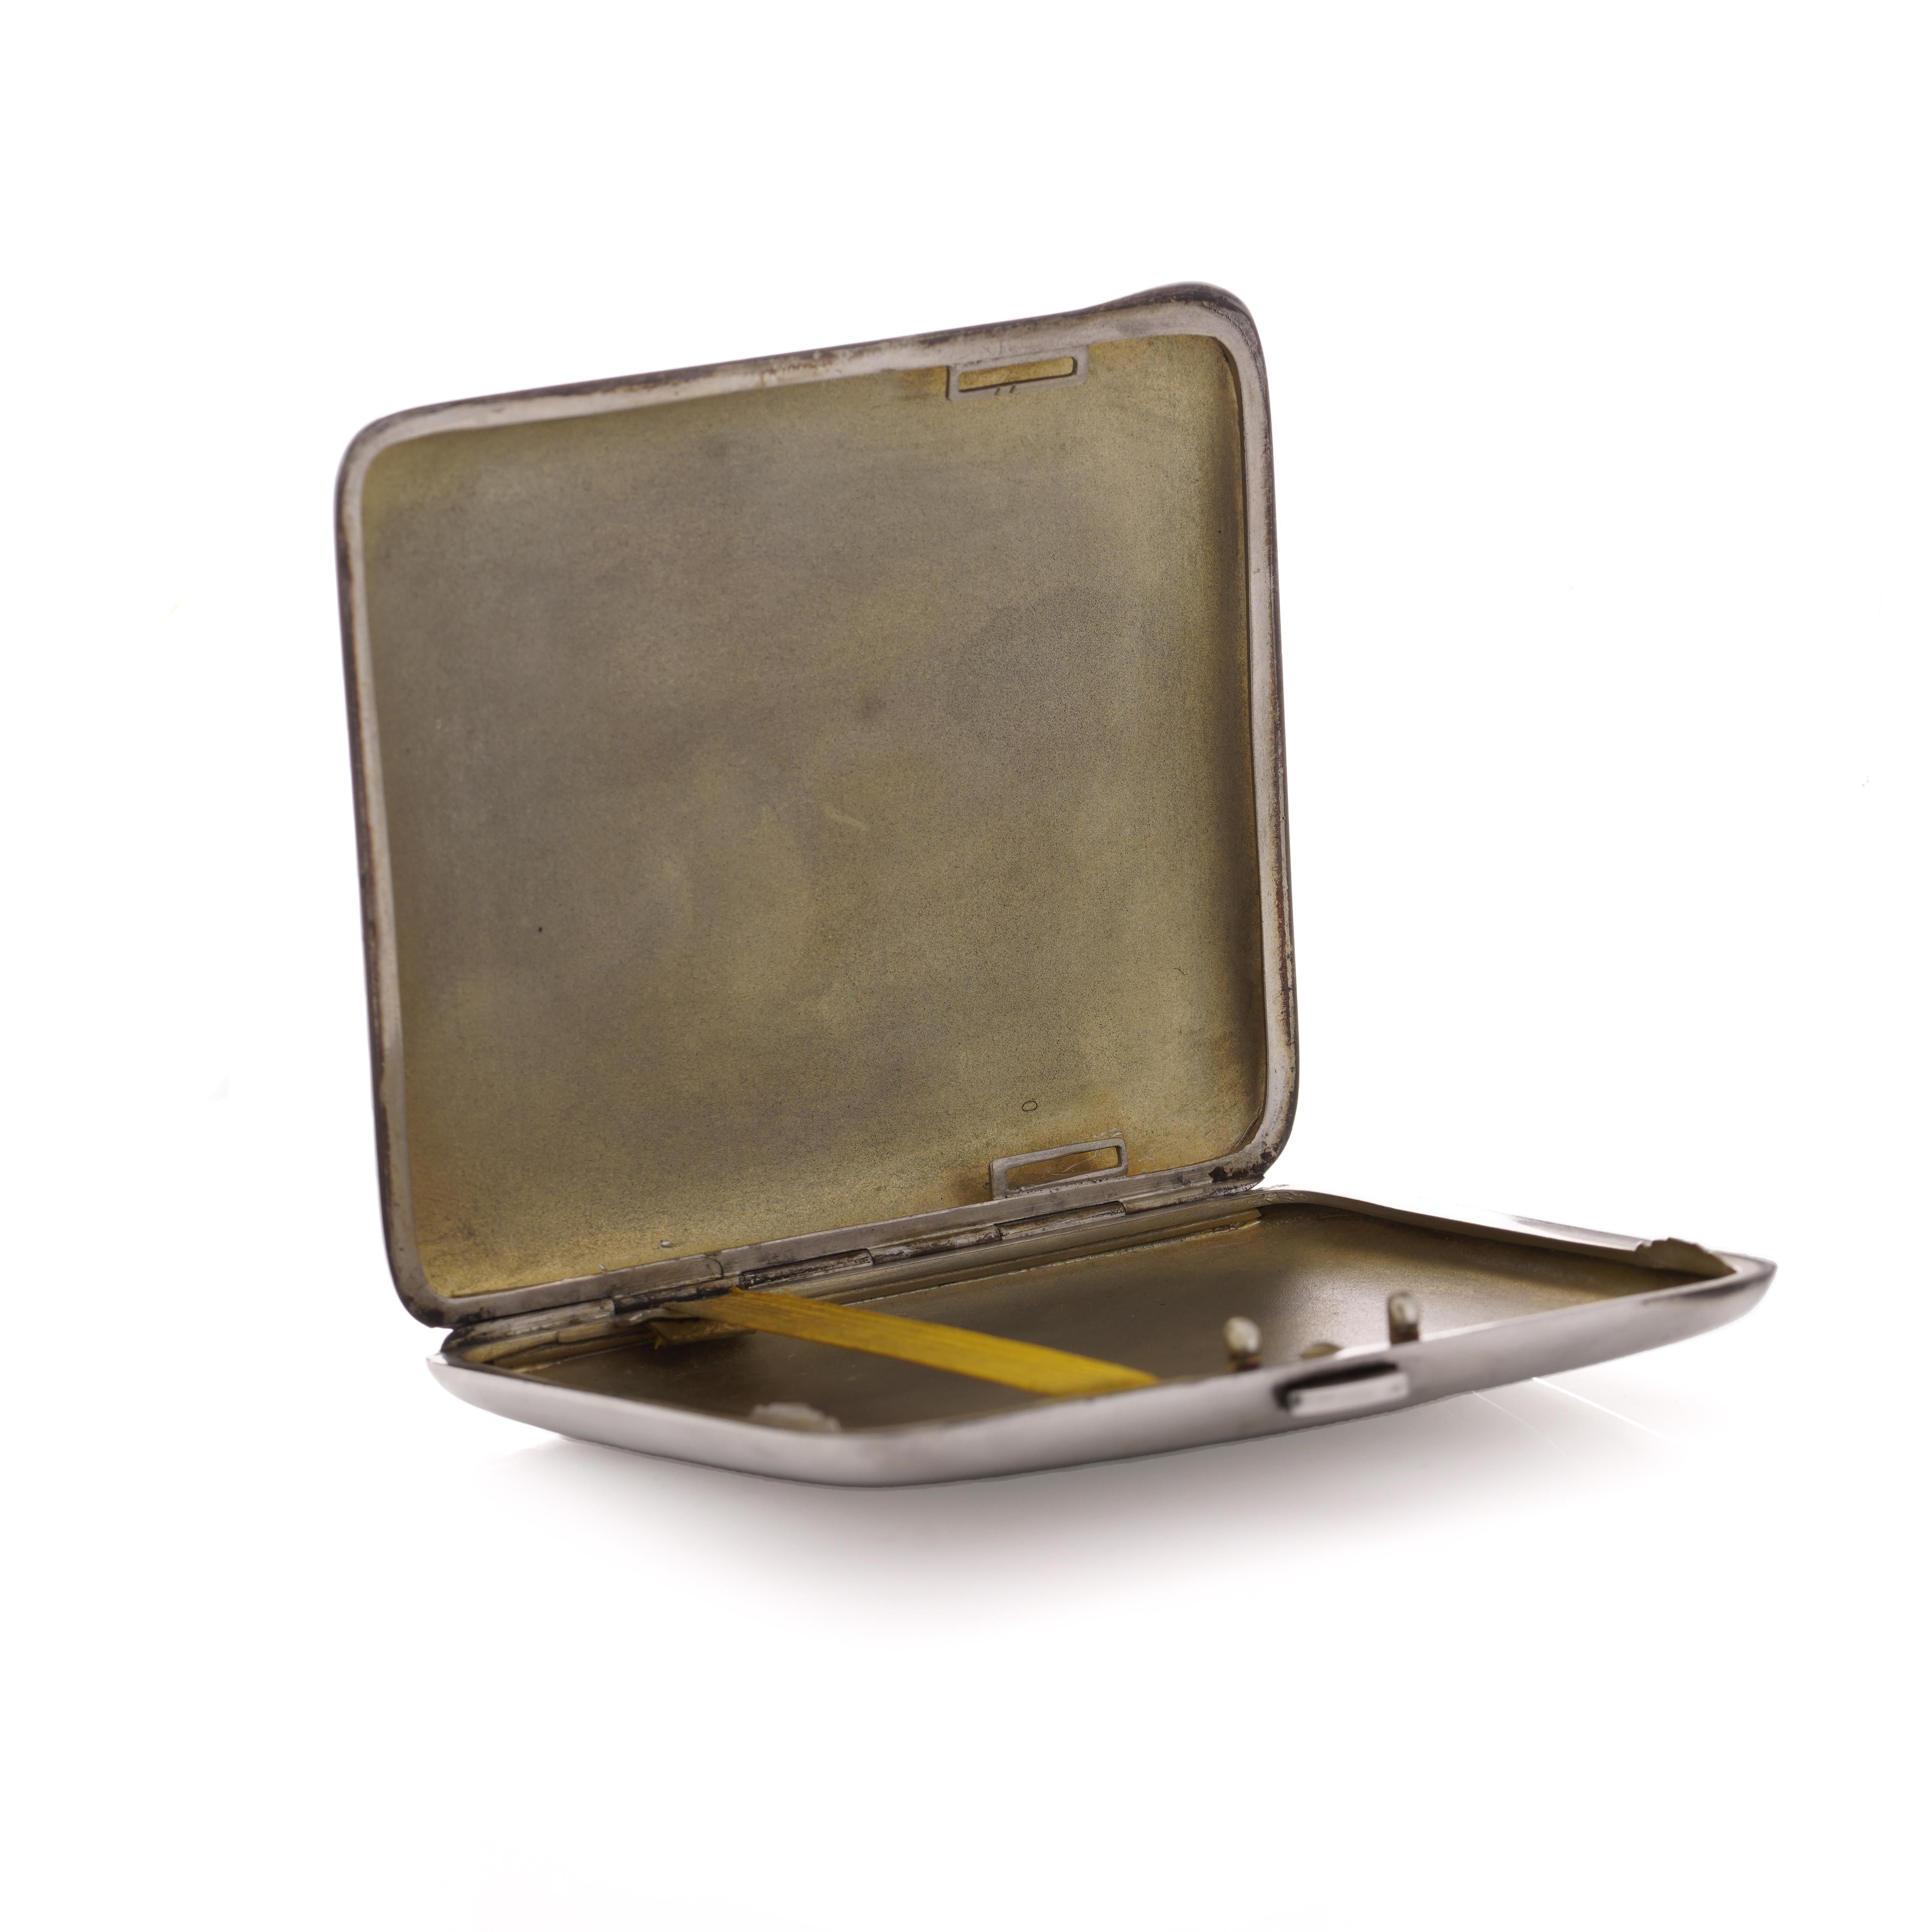 Antique Art Deco period Austrian 935. silver cigarette case with enamel leaf ornaments.
Made in Circa 1920 - 1930s
Hallmarked with 935 silver mark.

Dimensions:
Length x width depth: 9 x 8.5 x 1.00 cm
Weight: 137.4 grams

Condition: The cigarette